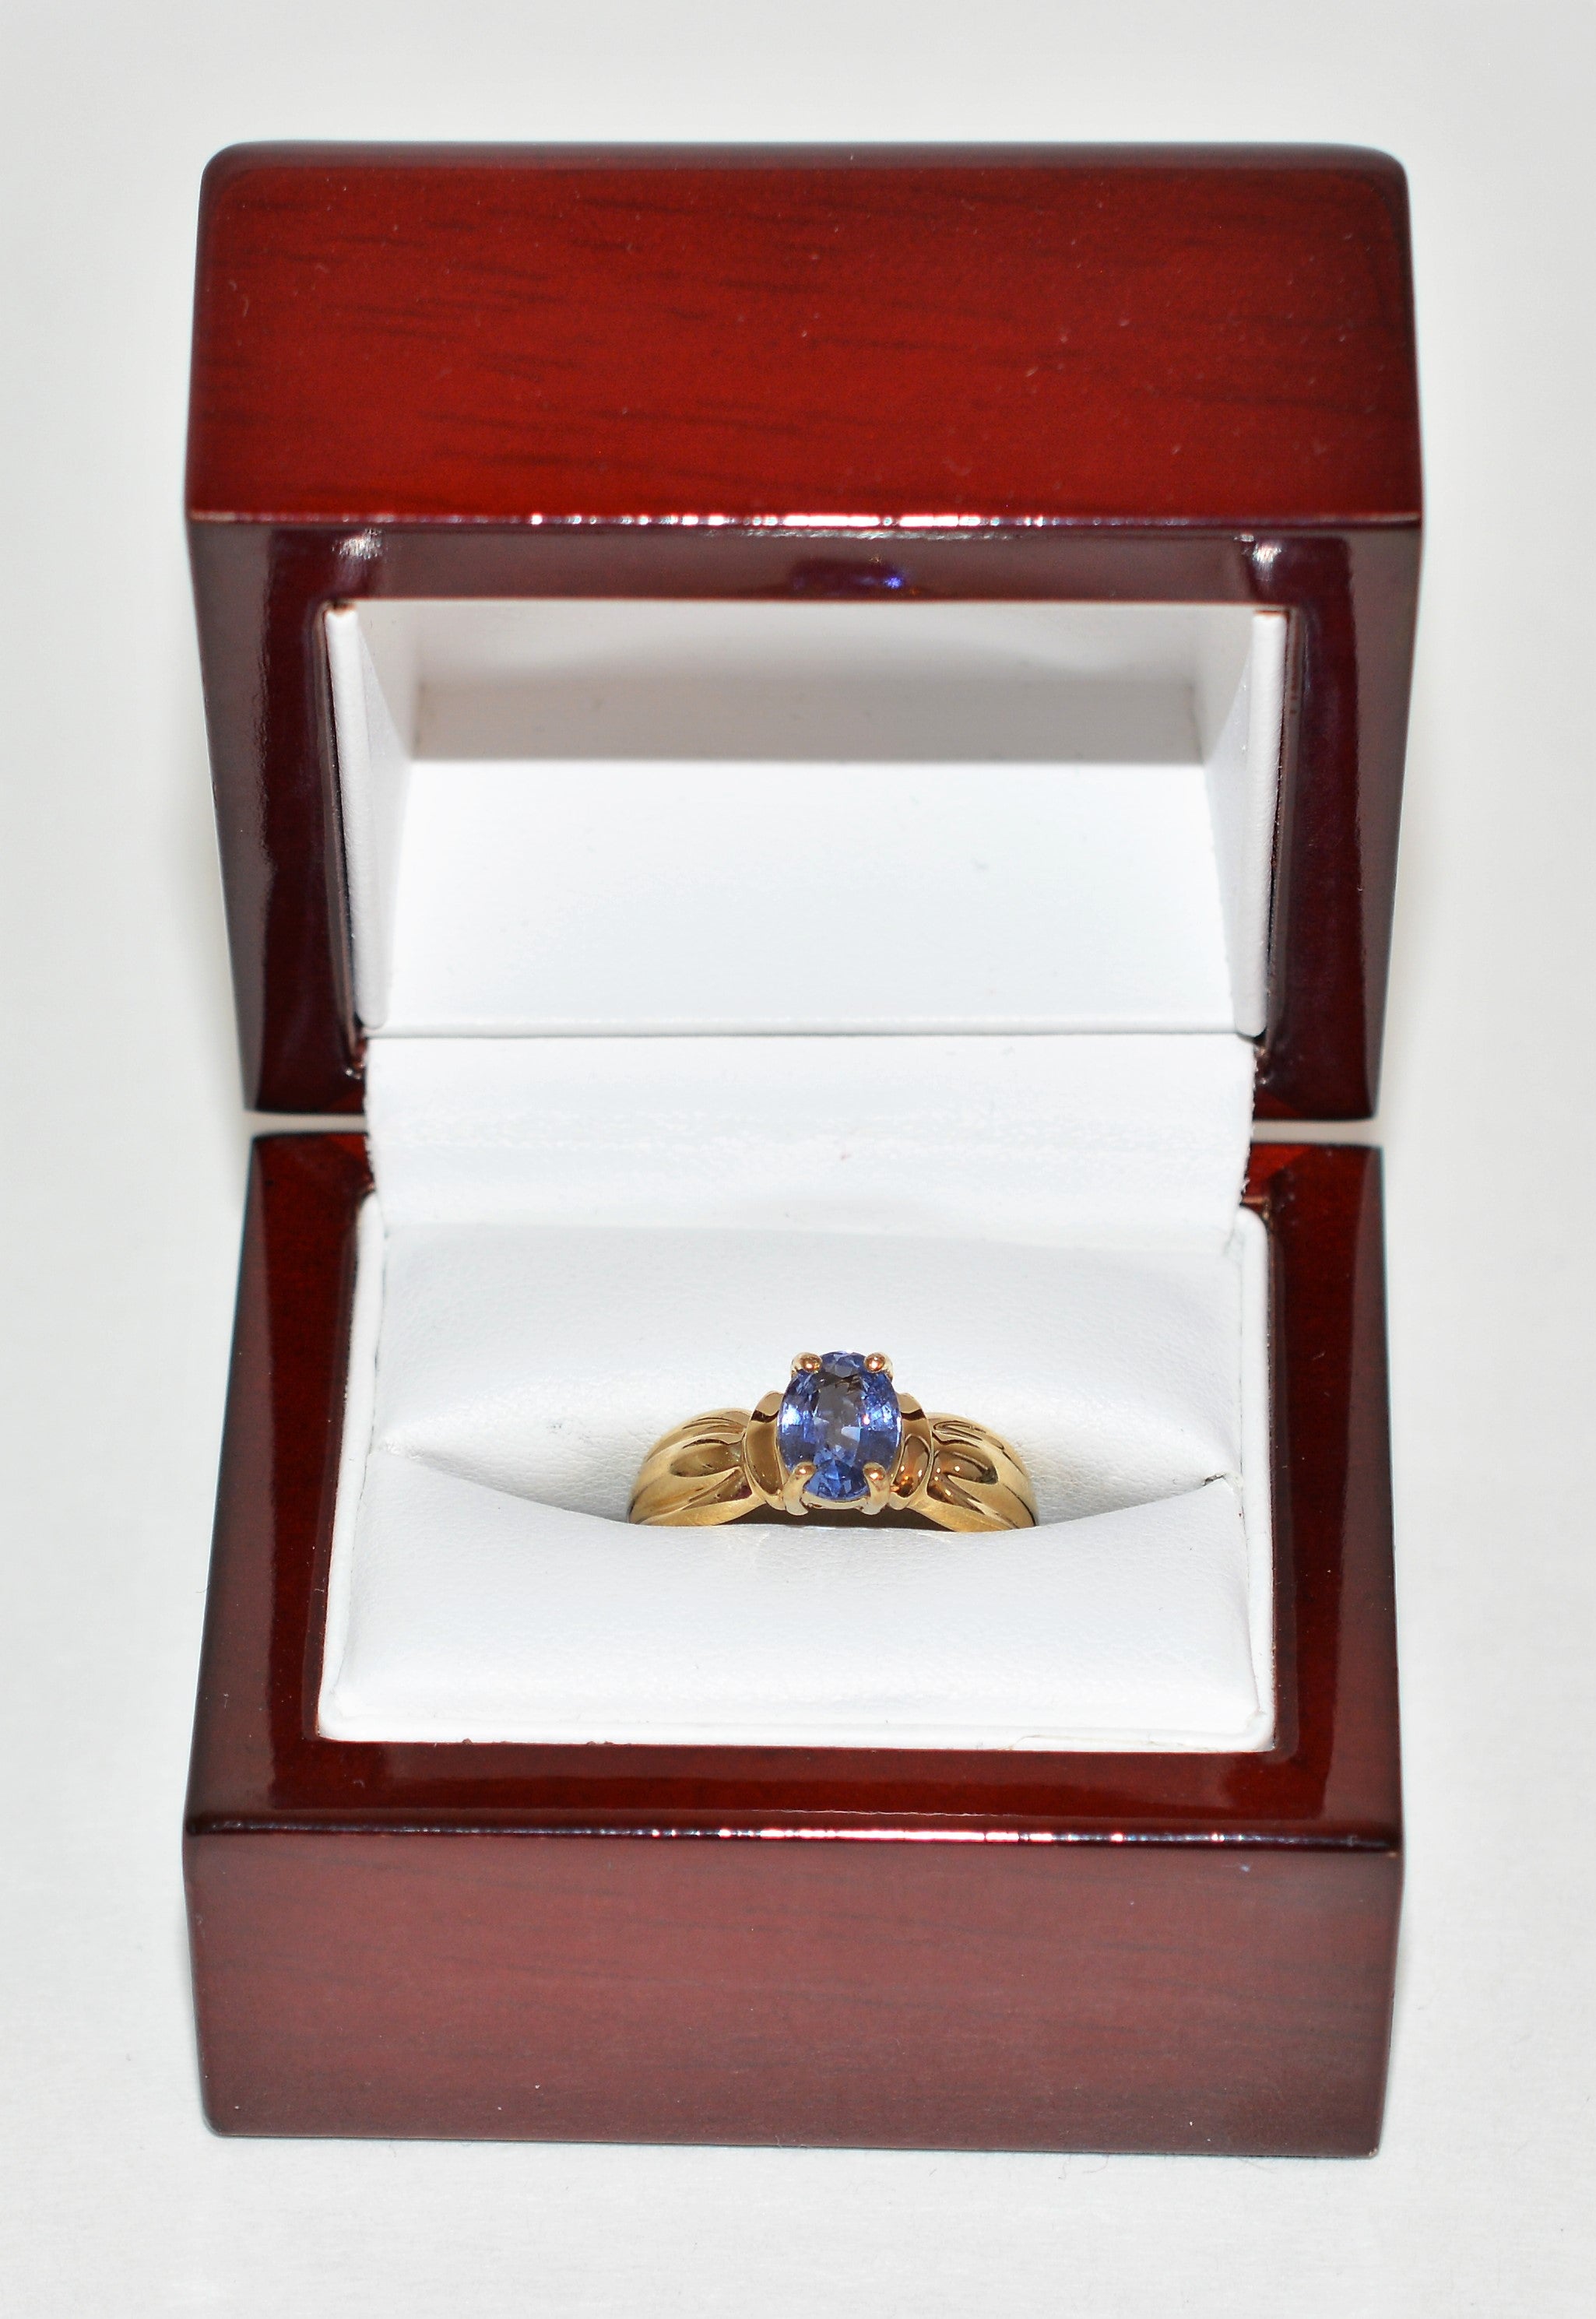 Certified Natural Tanzanite Ring 14K Solid Gold 1.58ct Solitaire Ring Vintage Ring December Birthstone Ring Estate Jewelry Jewellery